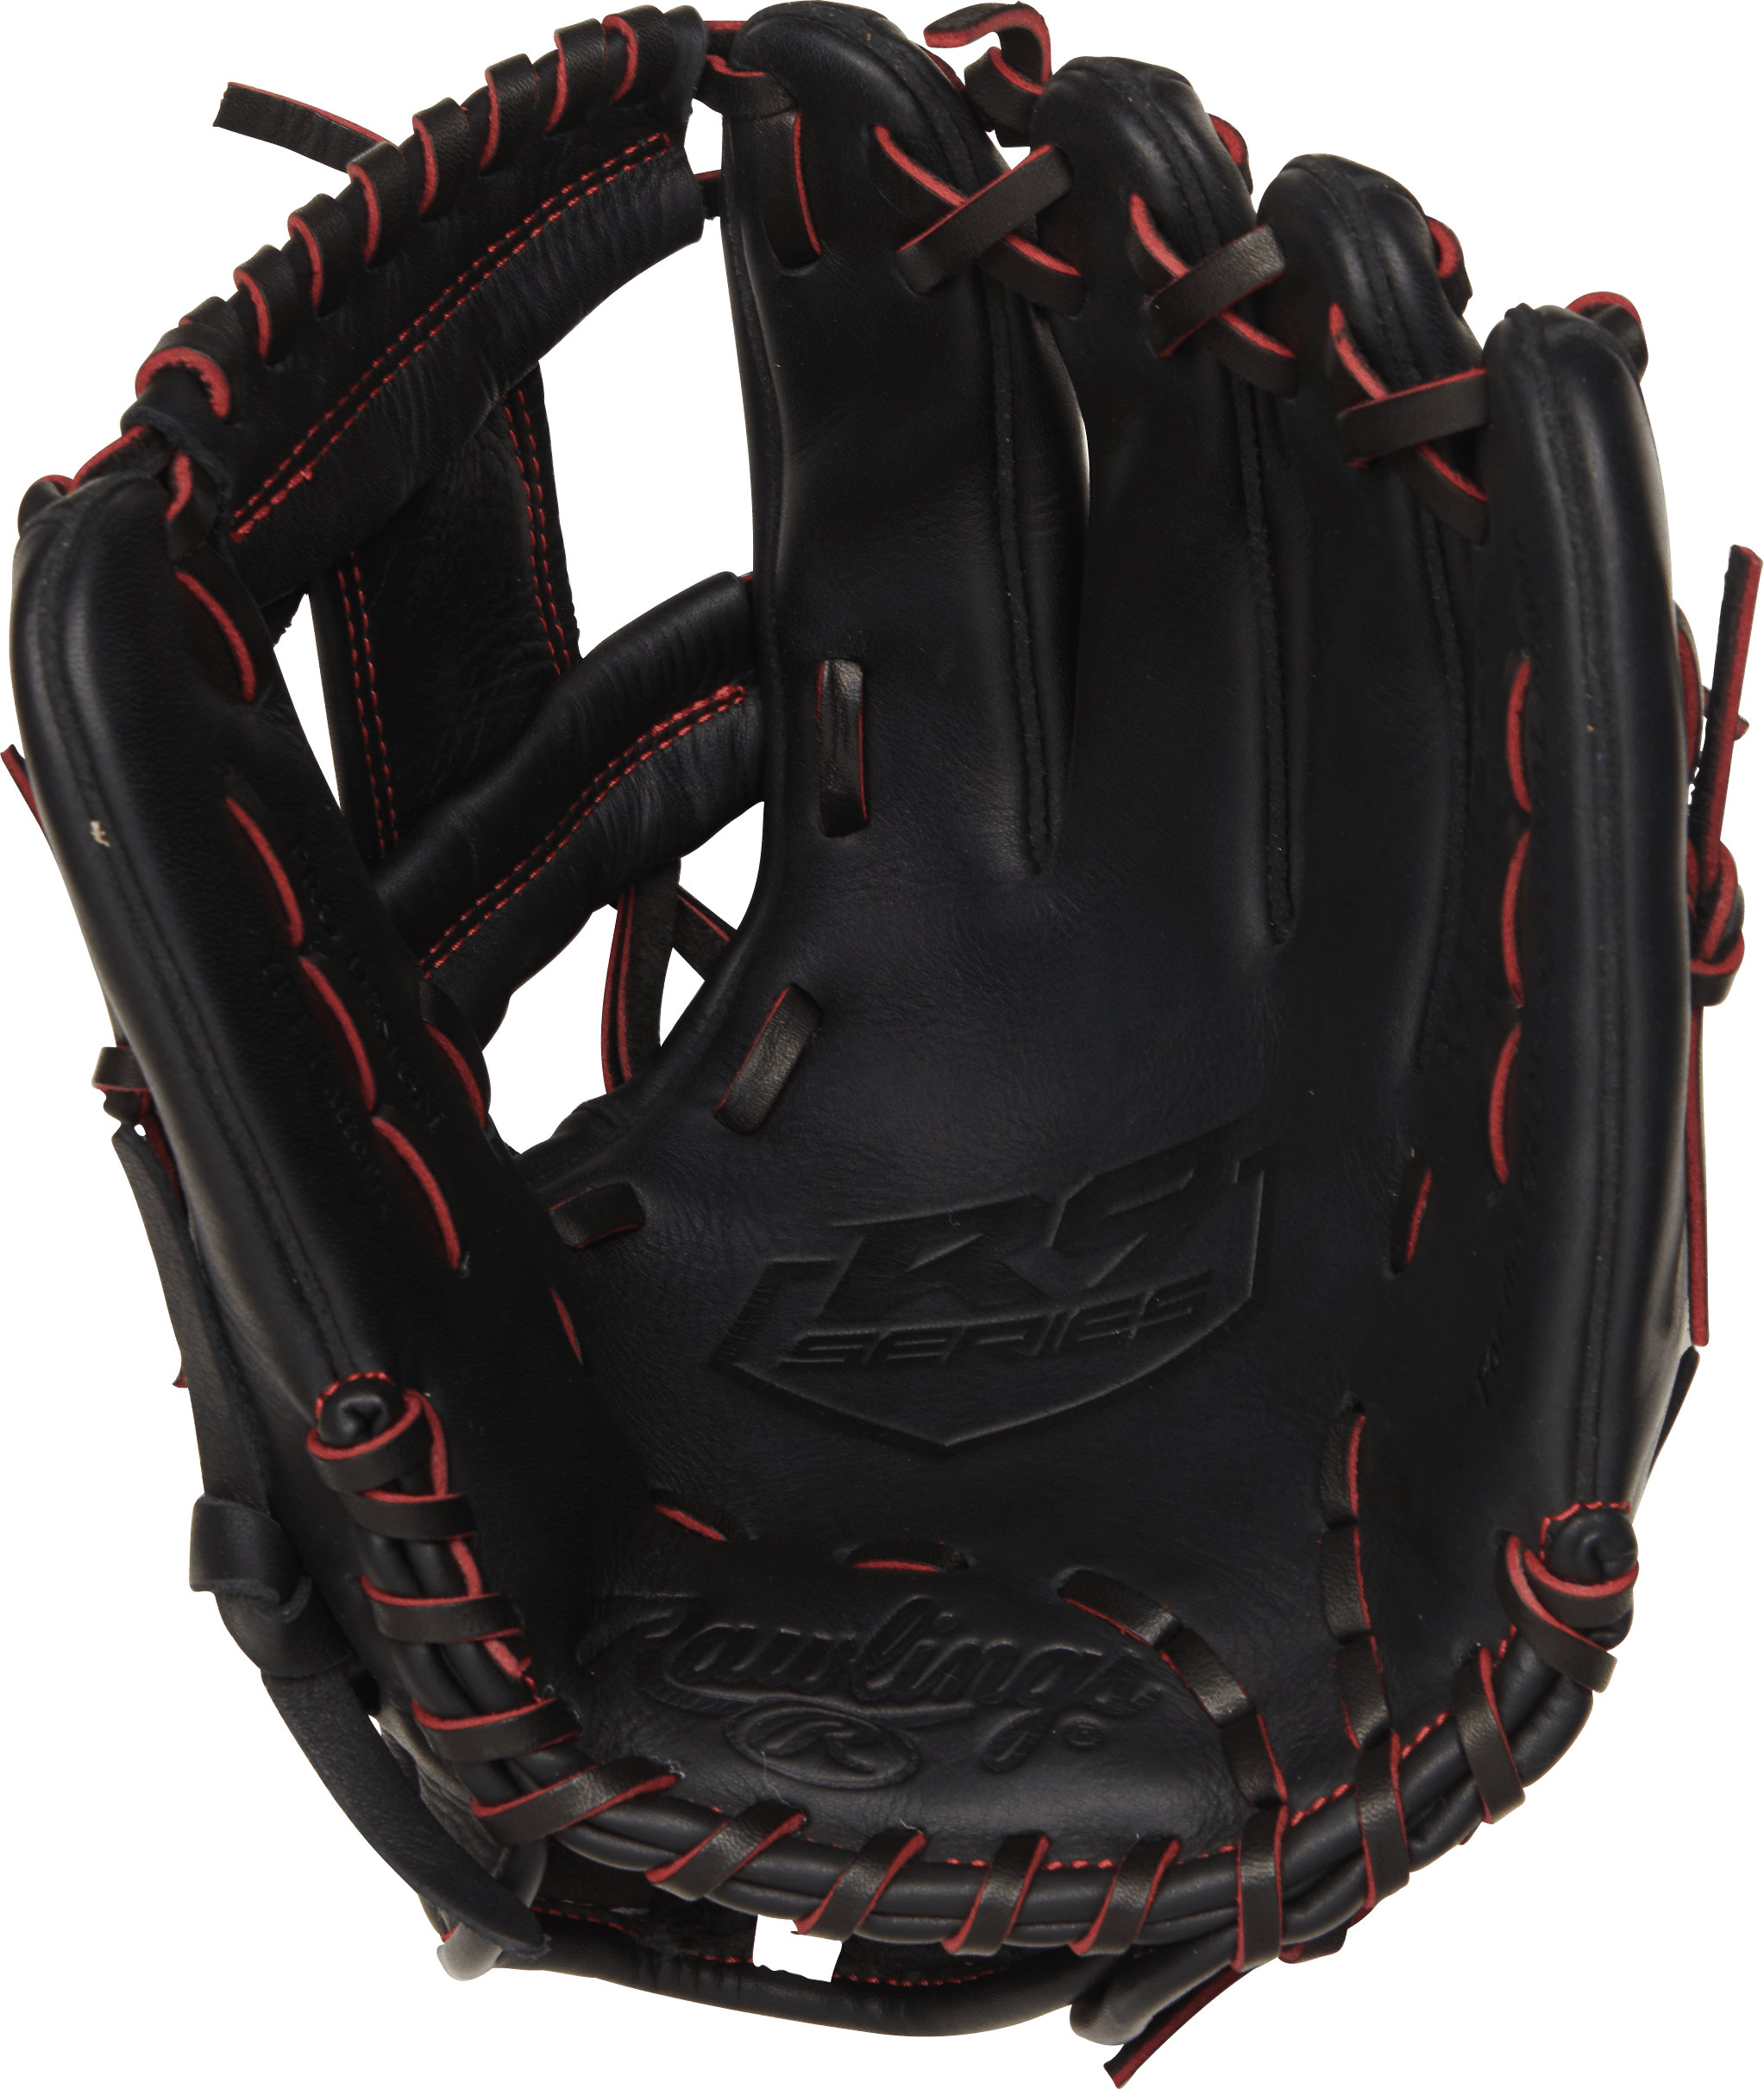 R9 Series 11.25 in Pro Taper Infield Glove - Youth - Sports Excellence